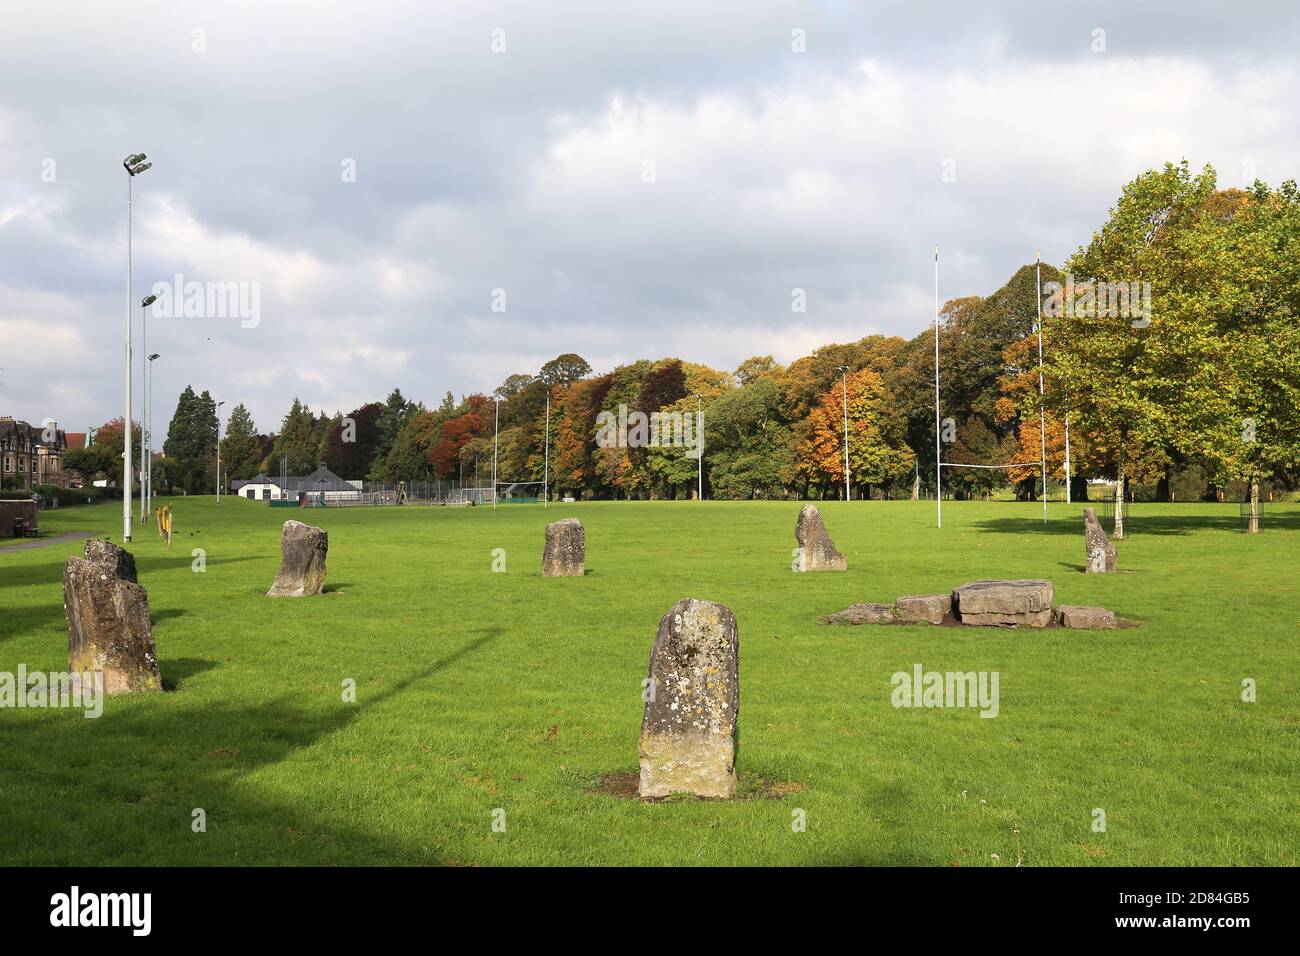 Gorsedd Stone Circle (erected for National Eisteddfod in 1993), Groe Park, Builth Wells, Brecknockshire, Powys, Wales, Great Britain, UK, Europe Stock Photo